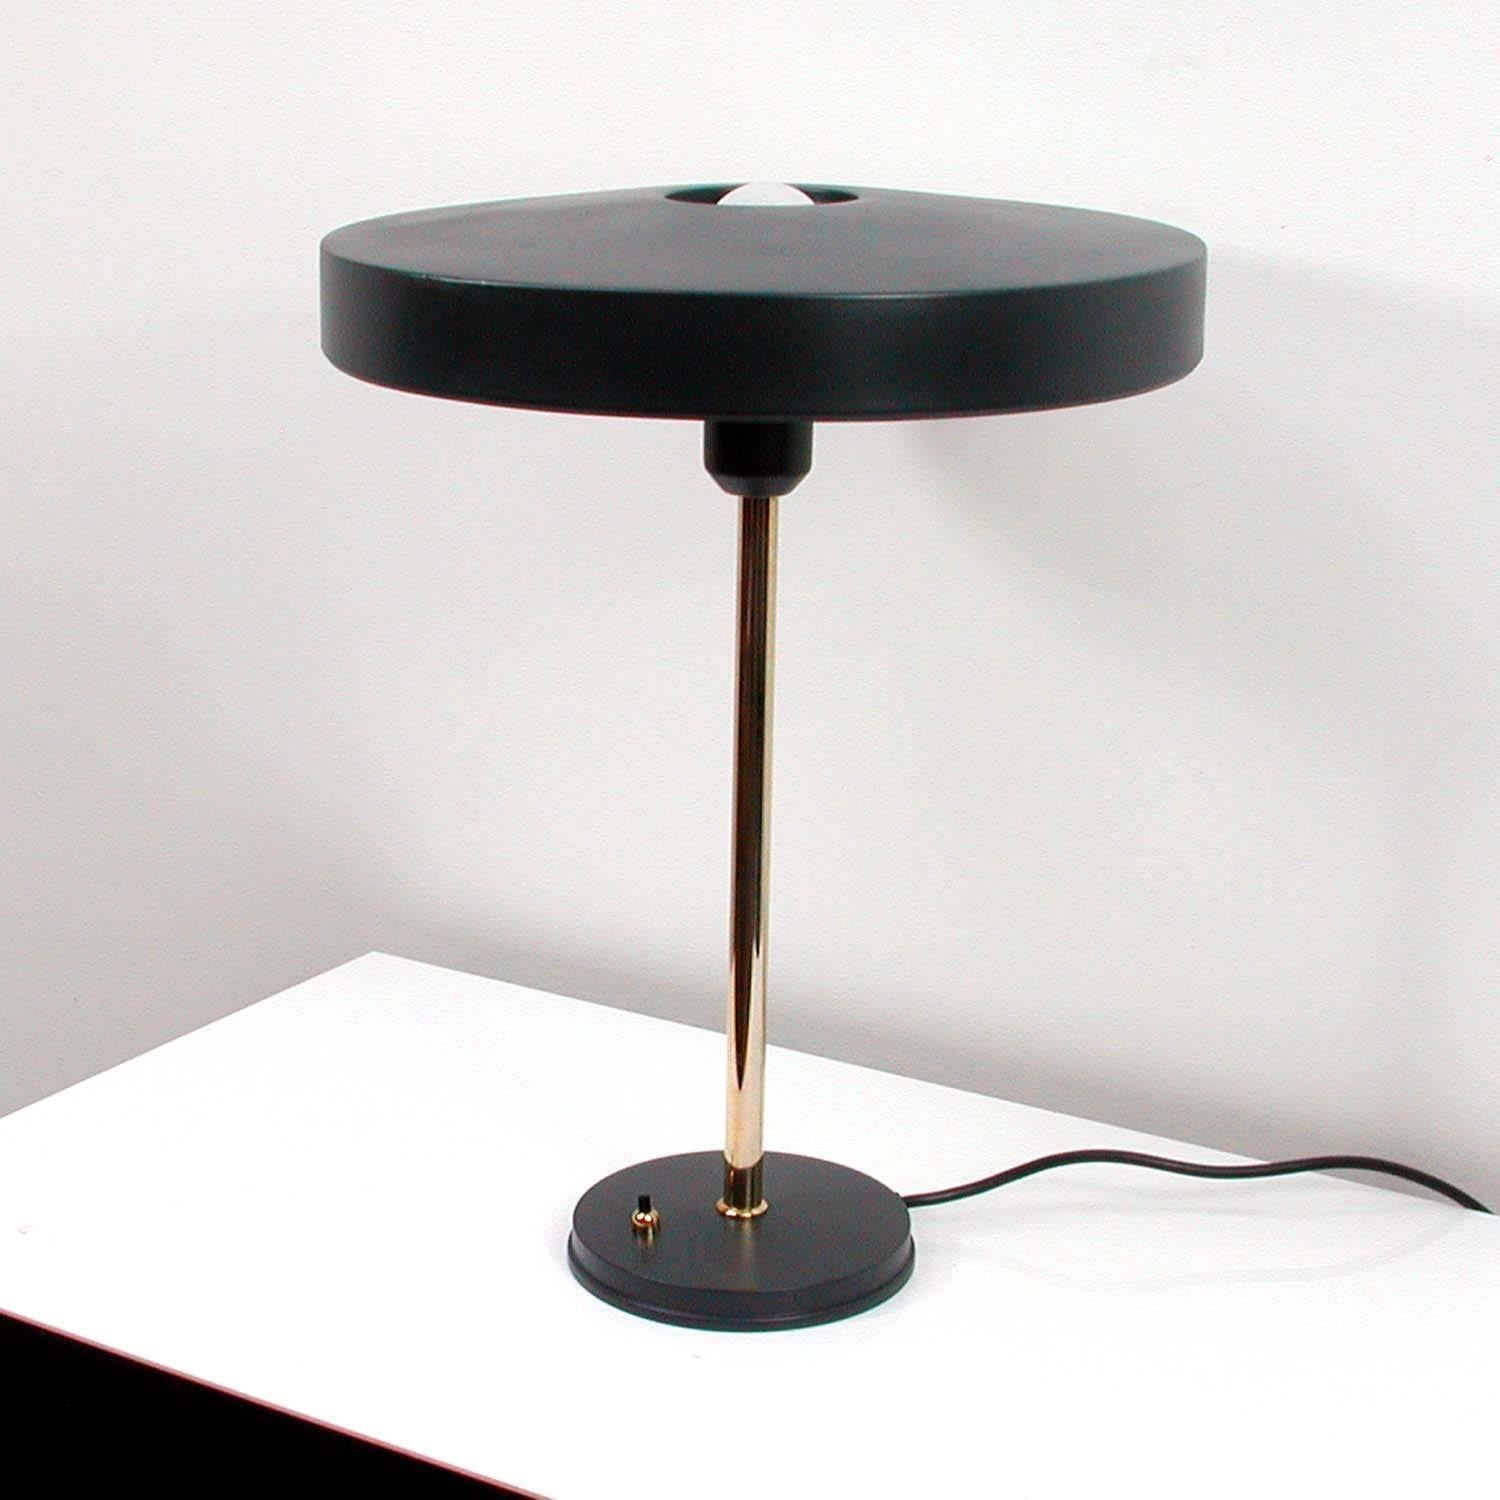 This Mid-Century table lamp was manufactured in the 1970s by Philips in the Netherlands and designed by Louis Christian Kalff. The model is 